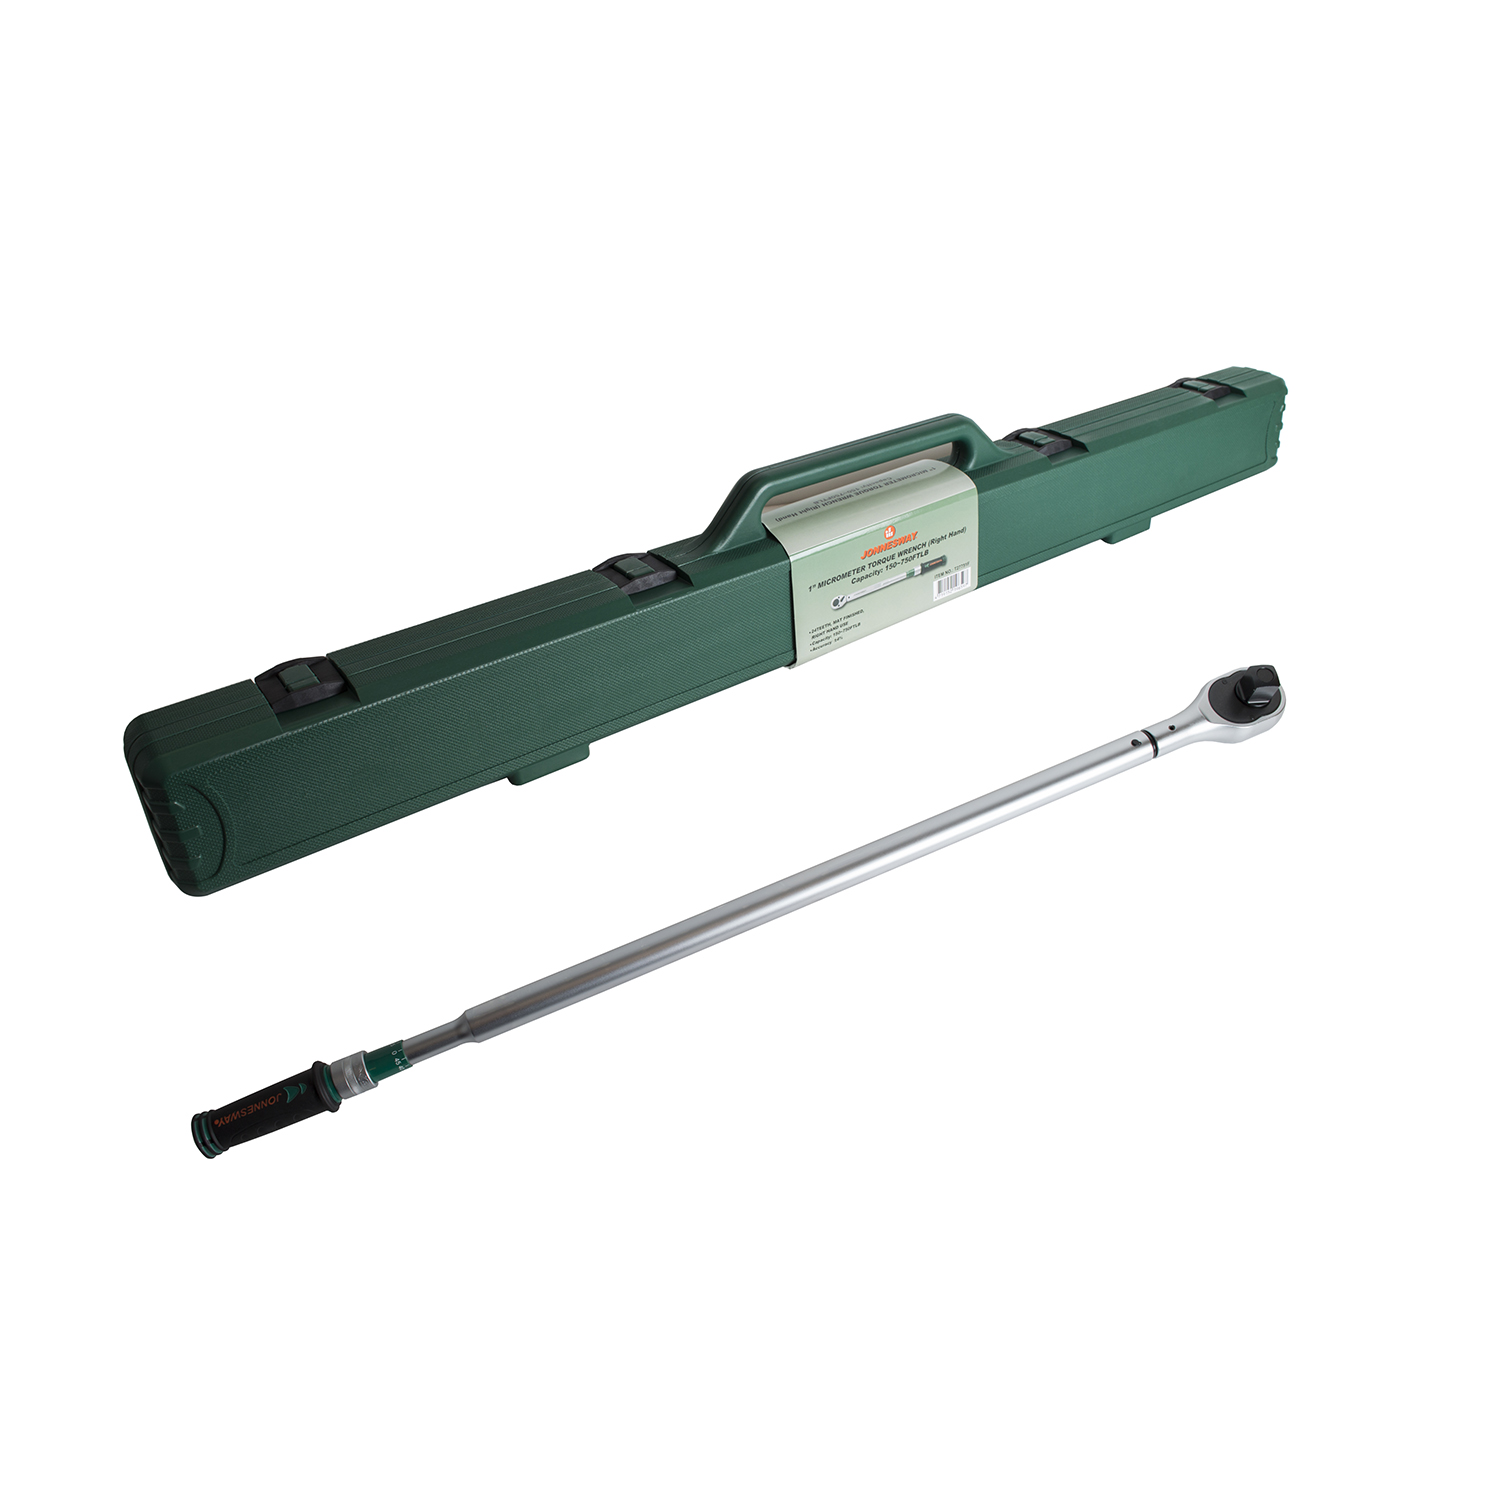 TORQUE WRENCH 1 "750 Ft-Lbs T27751F